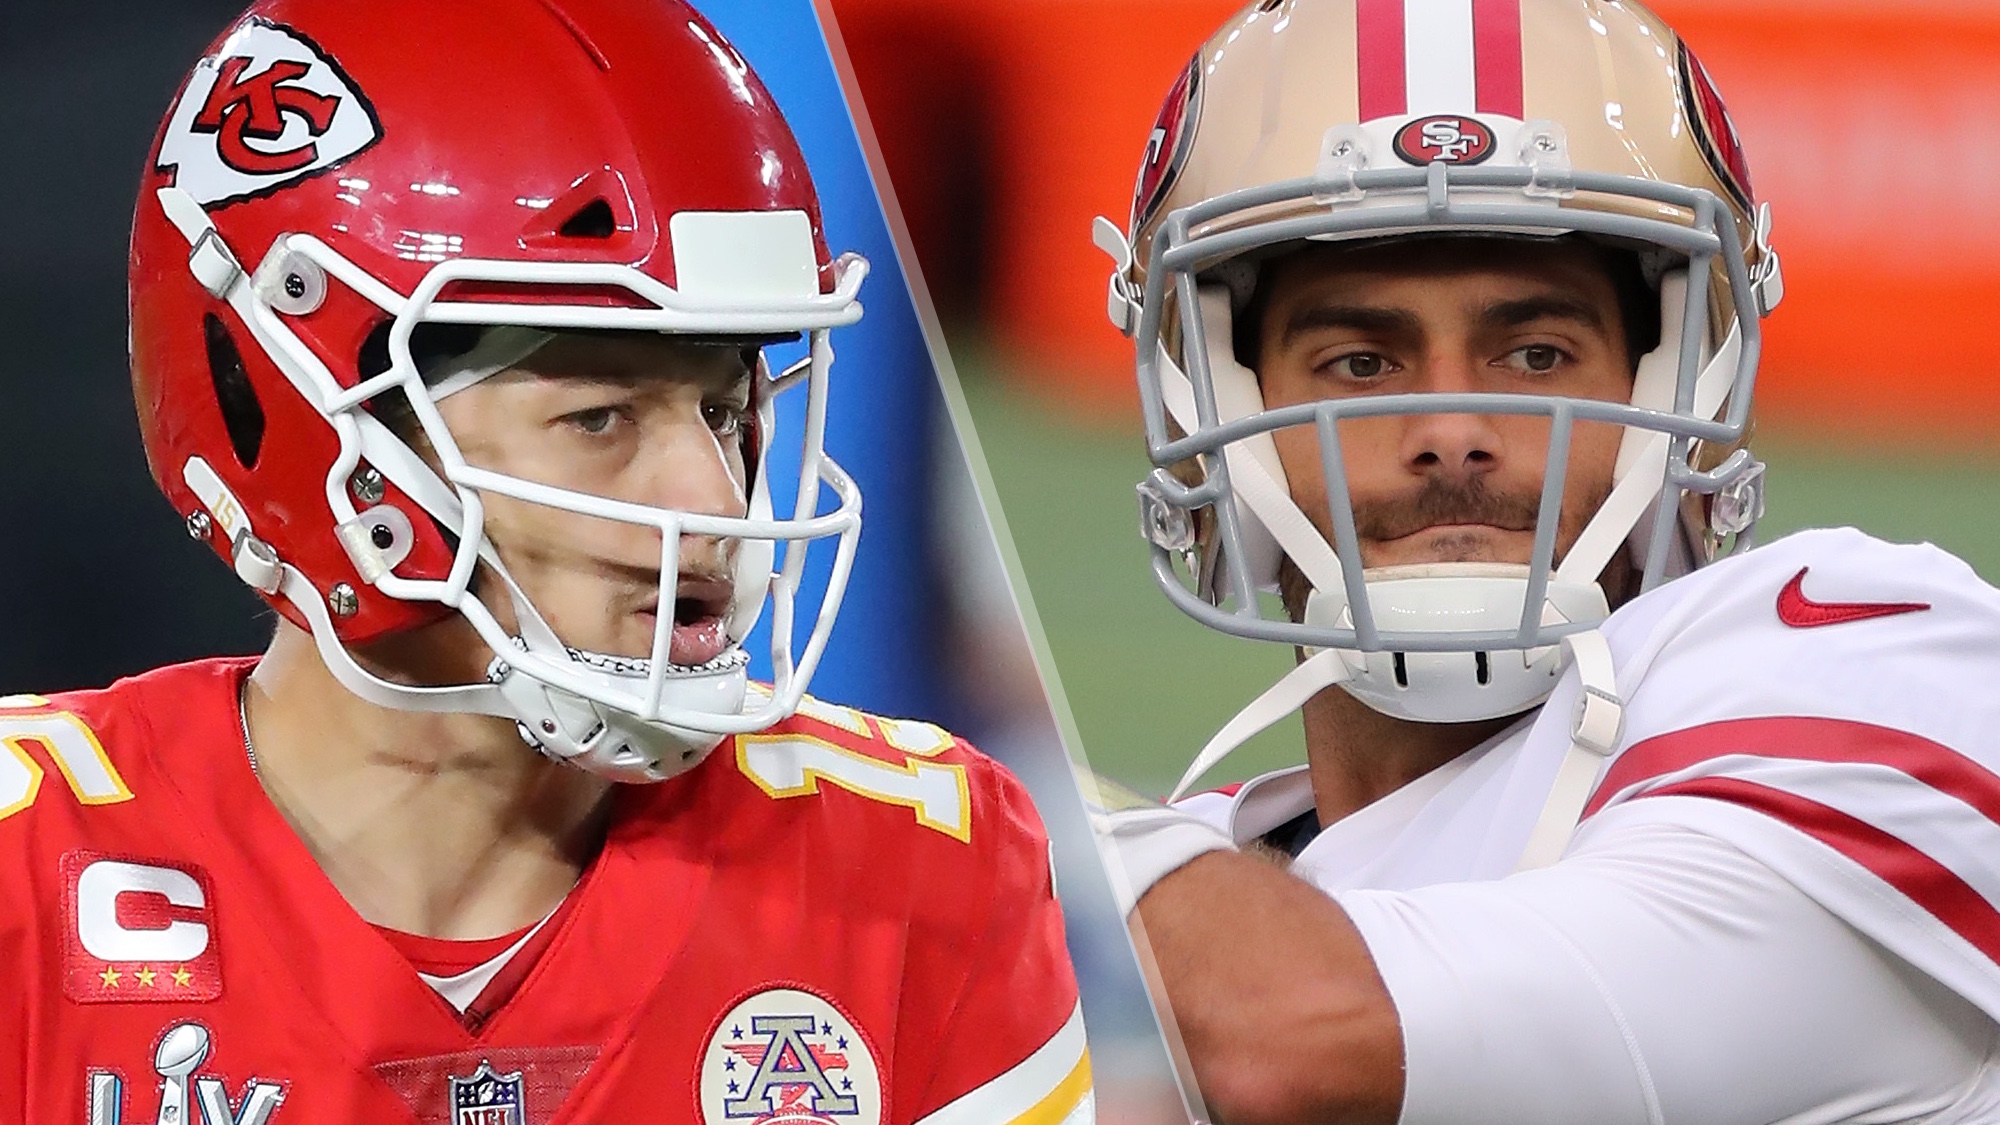 Chiefs vs 49ers live stream: How to watch 2021 NFL preseason game online